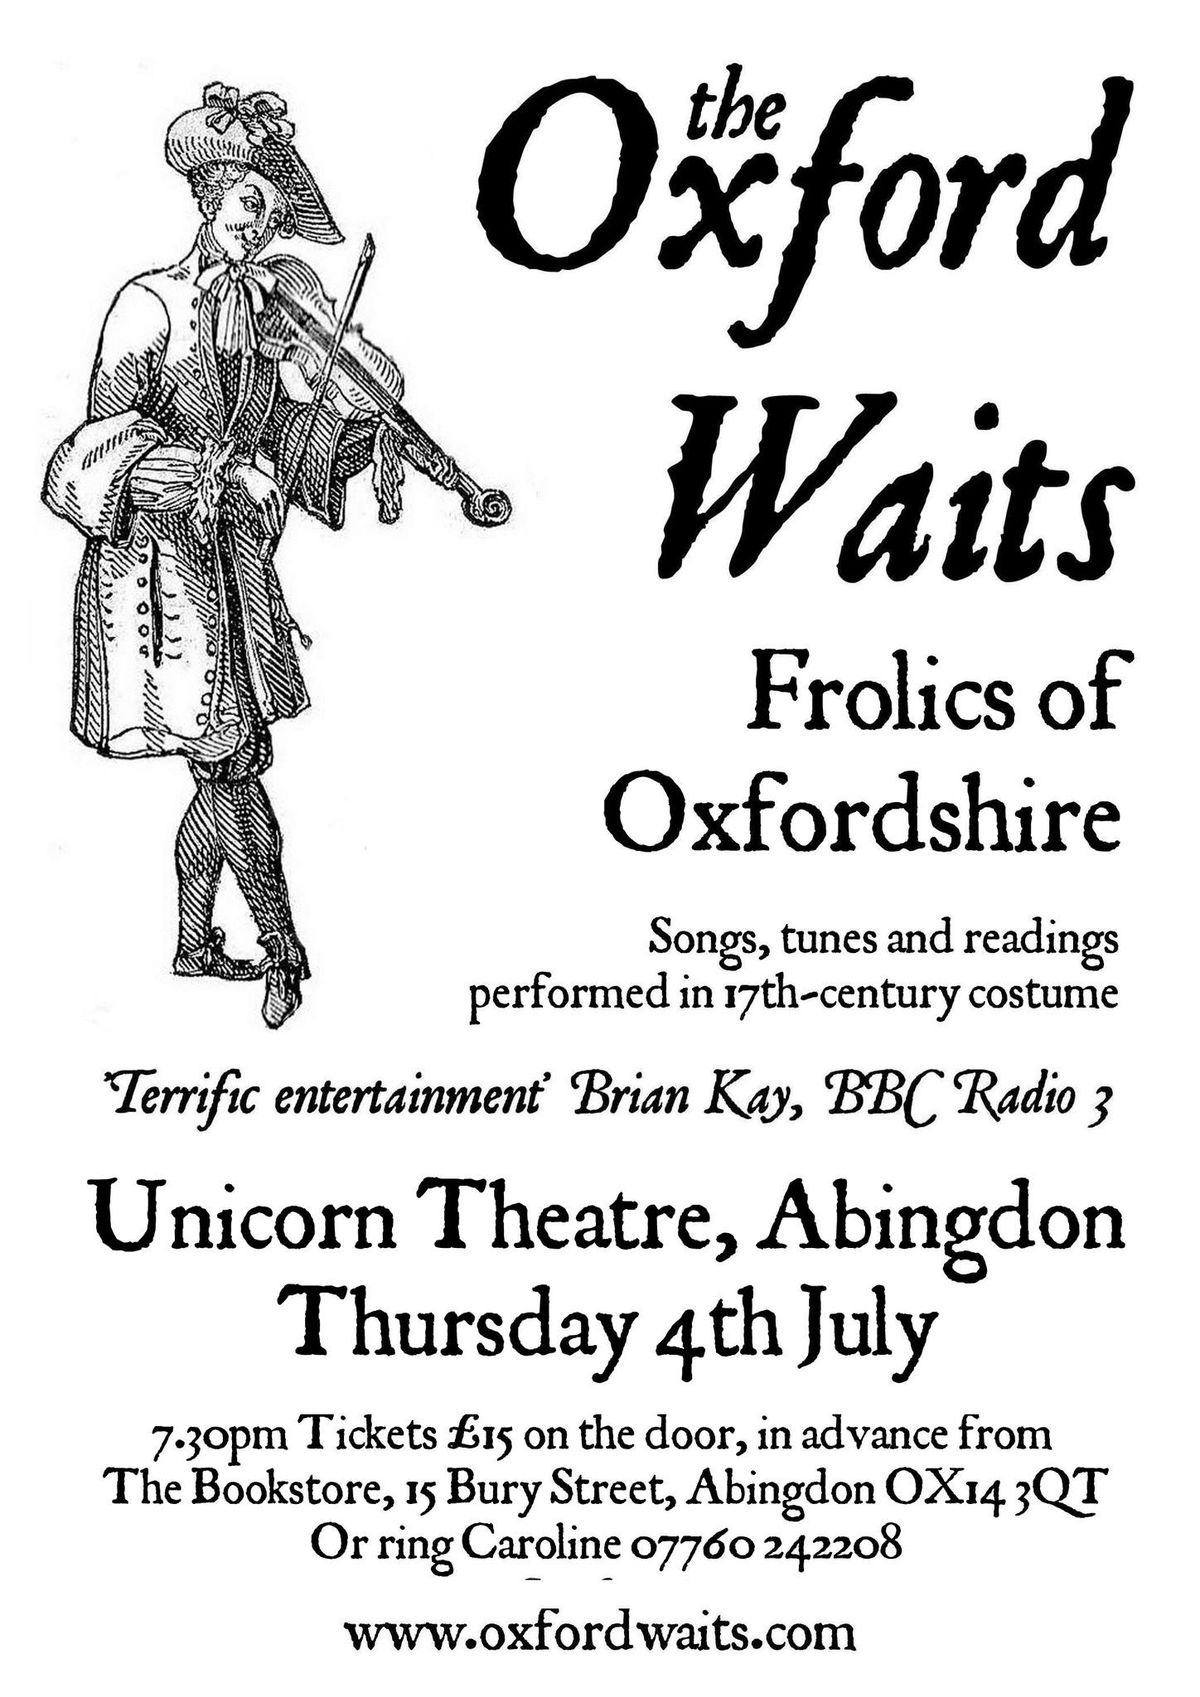 Oxford Waits: Frolics of Oxfordshire